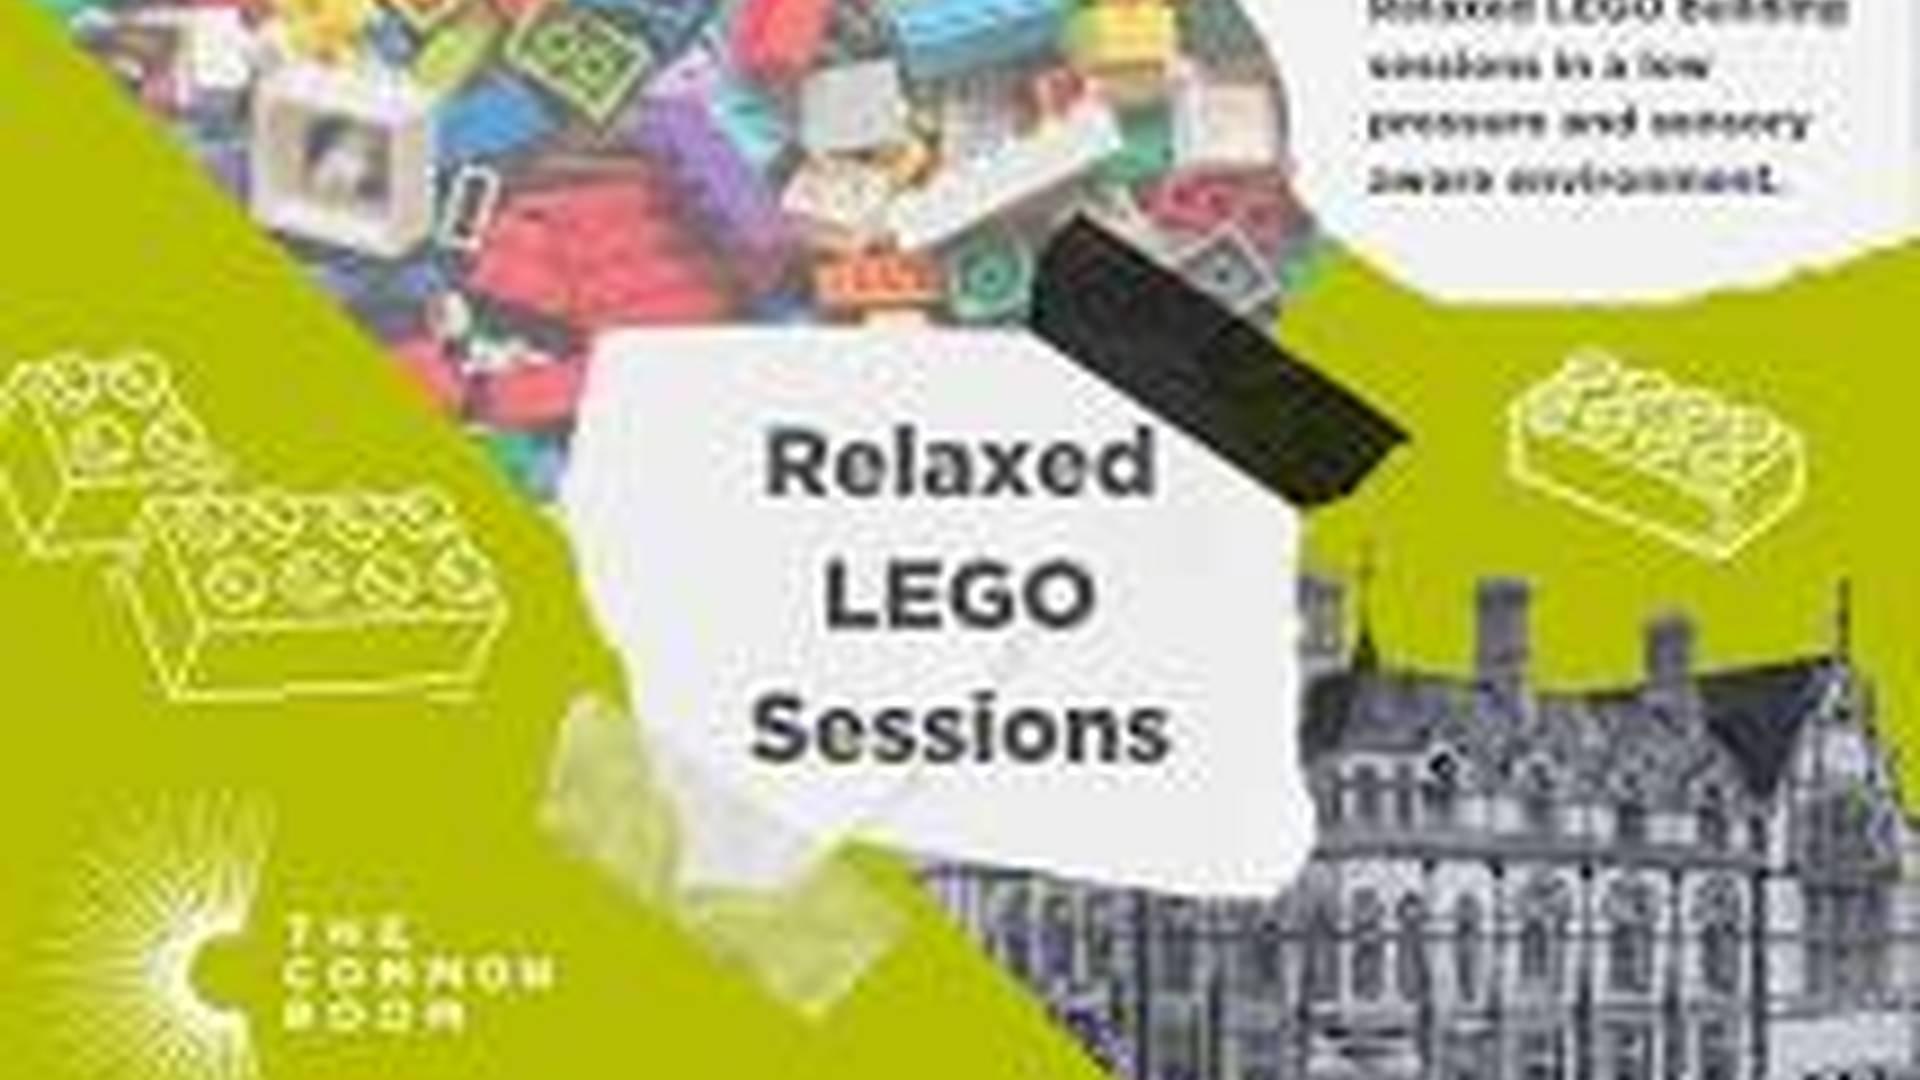 Relaxed LEGO Sessions photo